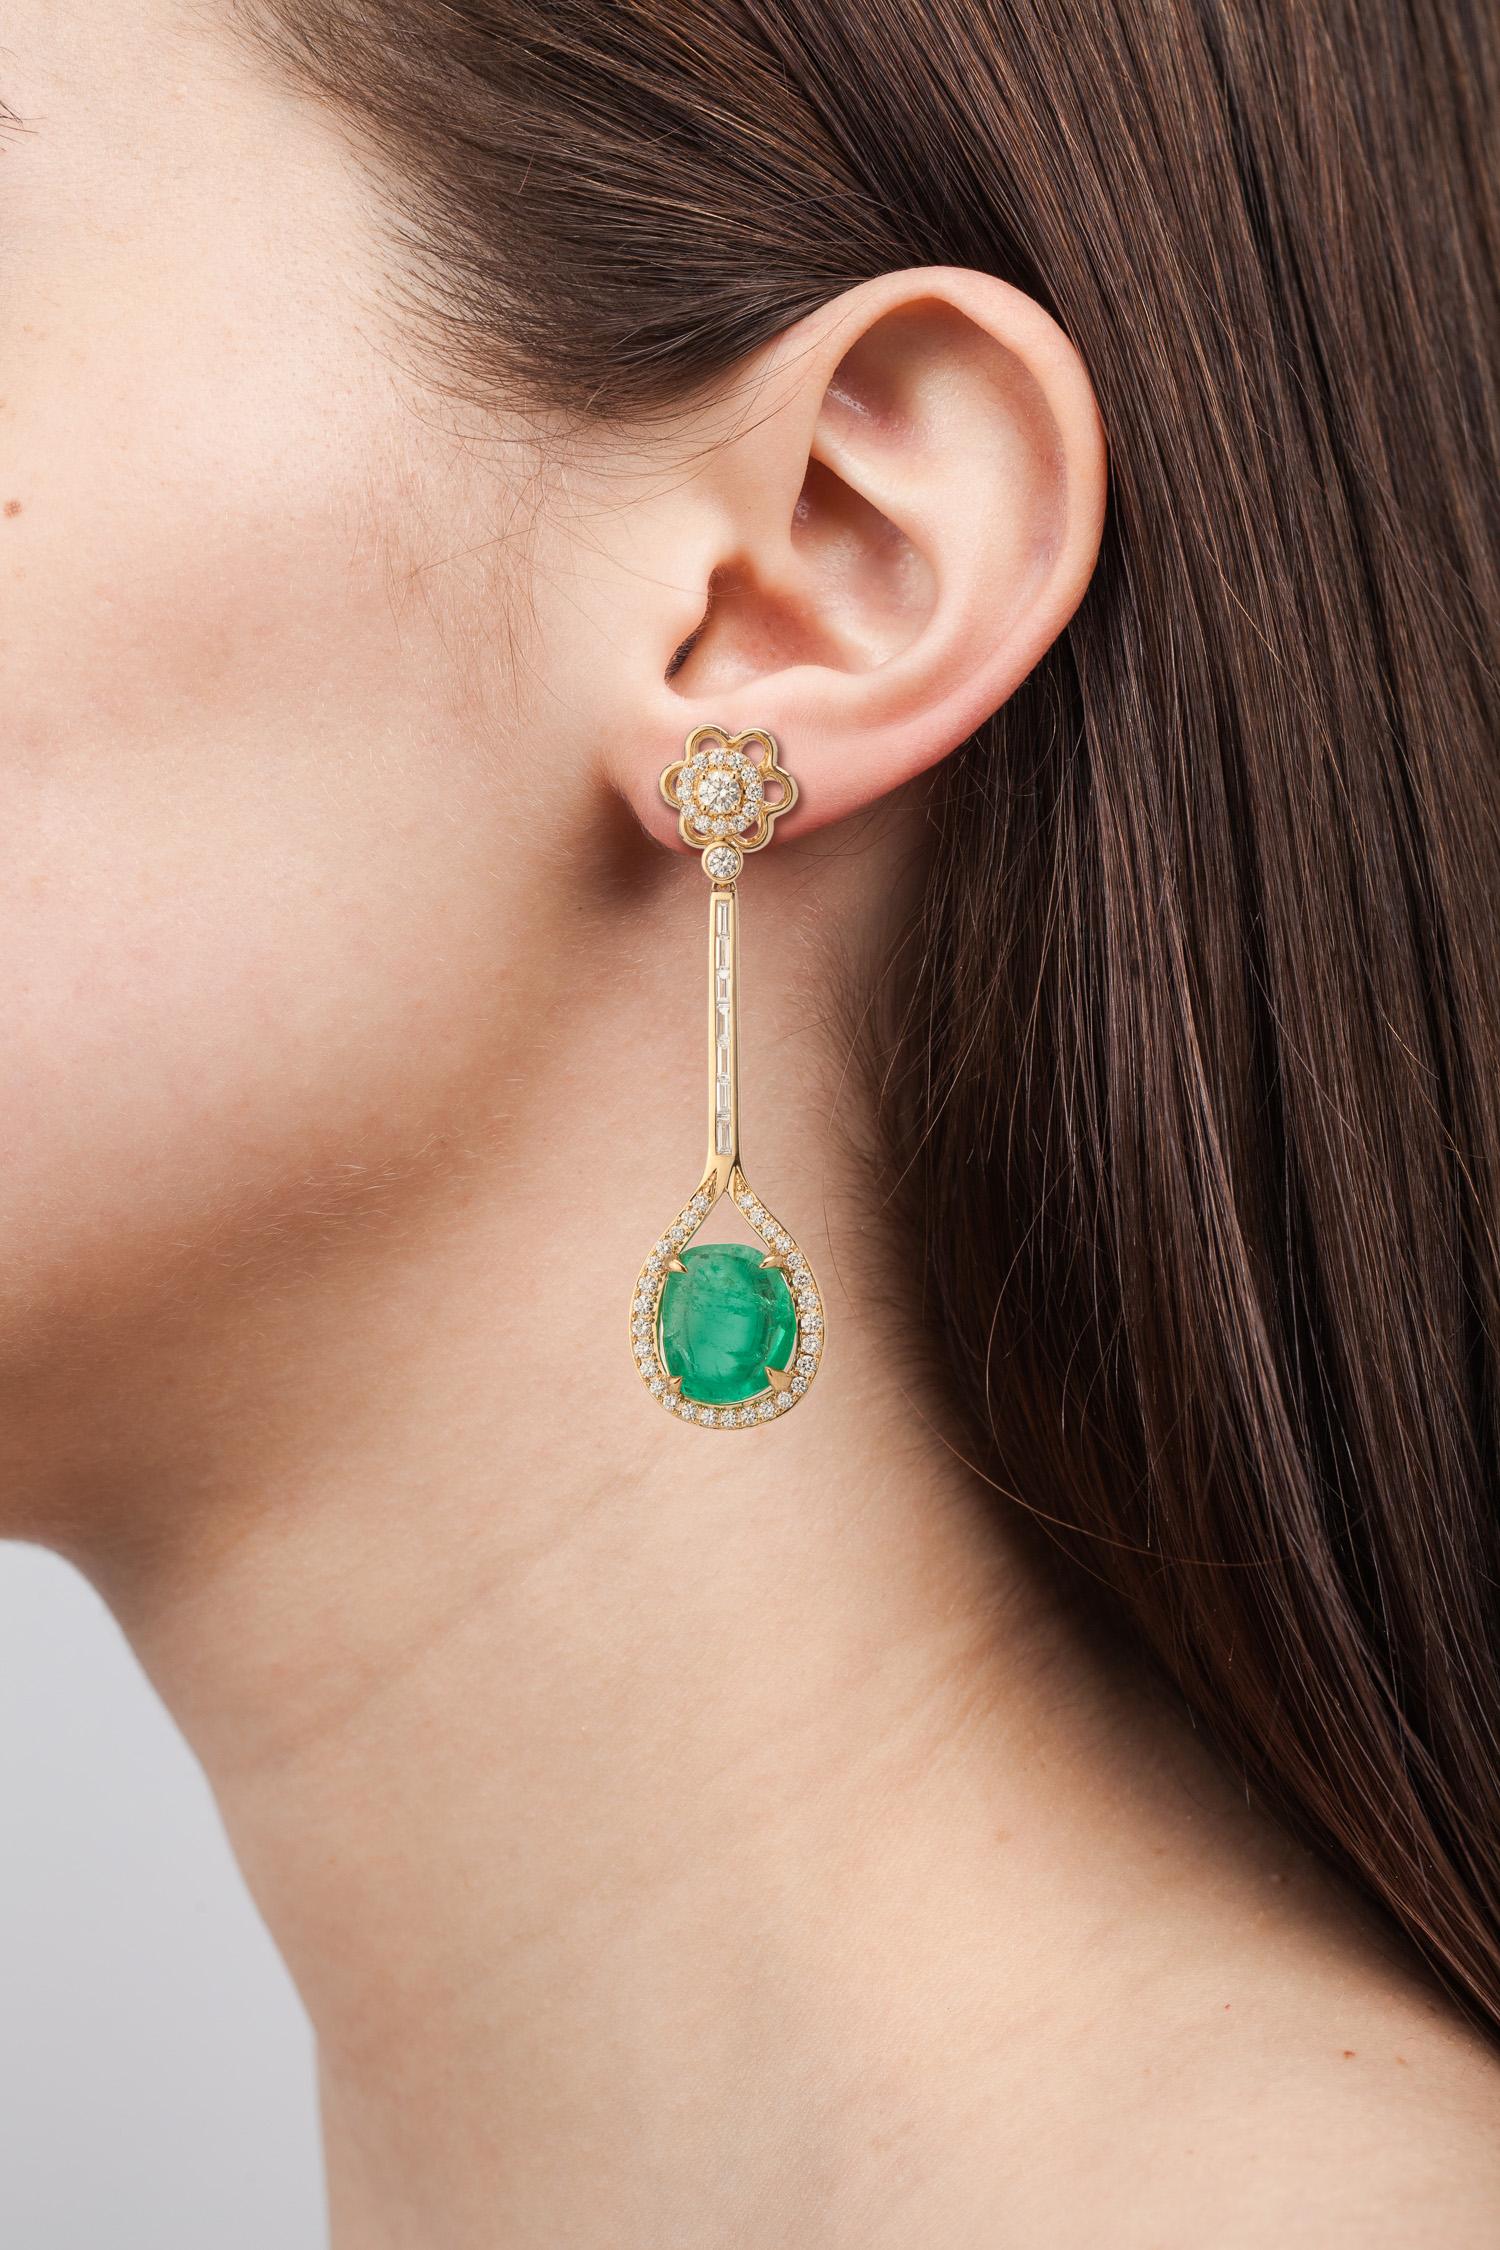 Muzo Emerald Colombia Heritage Verity Earrings set with 19.68 carats Emerald

Verity is a tribute to the trade between the Spaniards and Indian Maharajahs, two unique cultures that share a passion for gilded treasures and precious emerald gemstones.